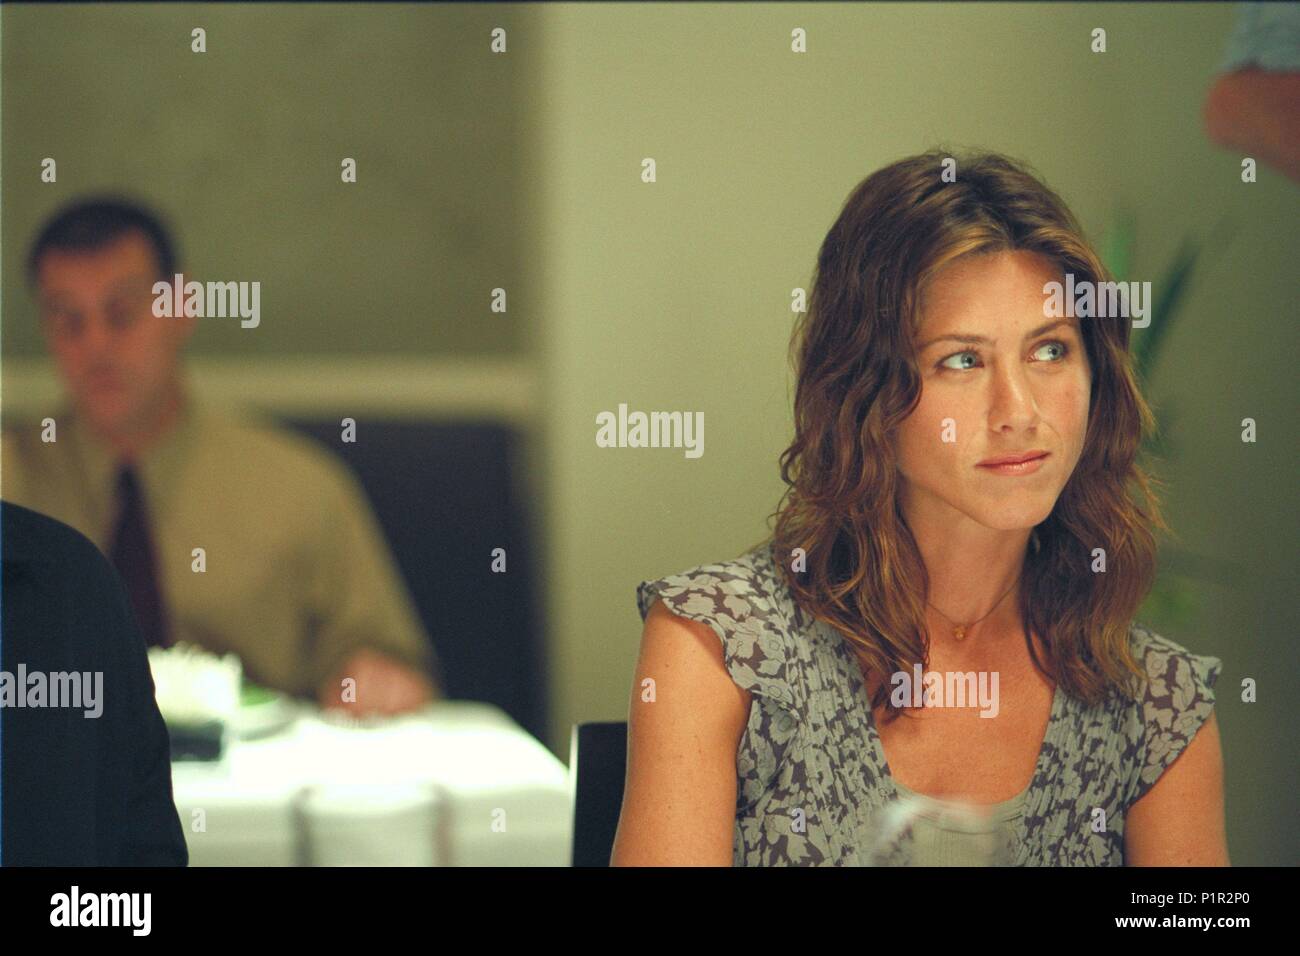 Original Film Title: FRIENDS WITH MONEY.  English Title: FRIENDS WITH MONEY.  Film Director: NICOLE HOLOFCENER.  Year: 2006.  Stars: JENNIFER ANISTON. Credit: THIS IS THAT PRODUCTIONS / Album Stock Photo